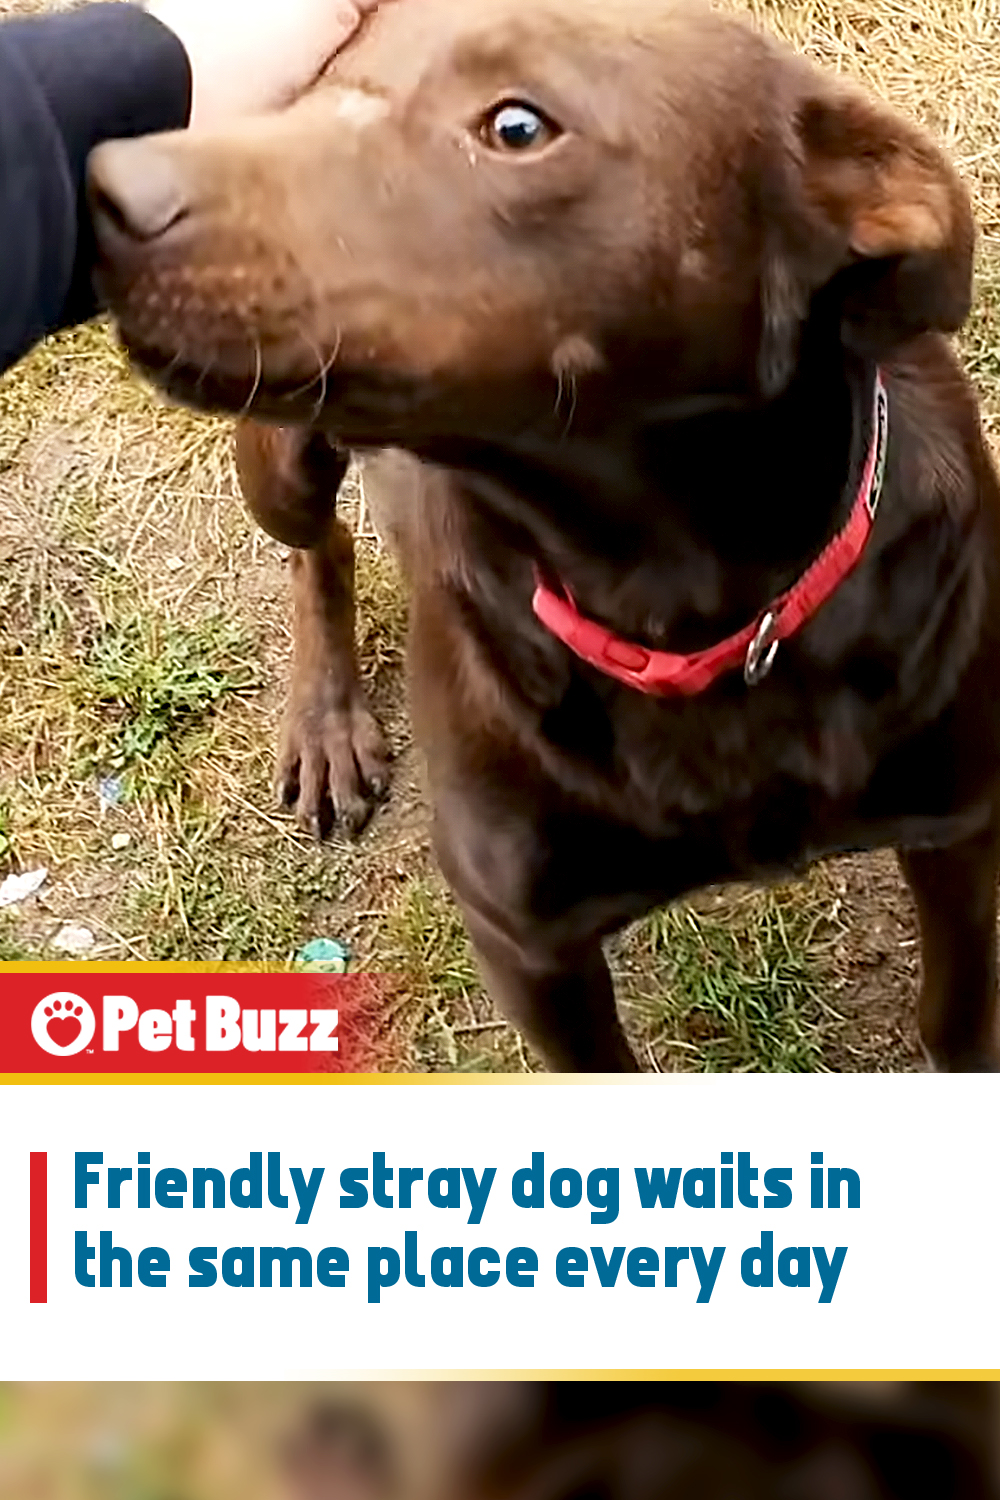 Friendly stray dog waits in the same place every day